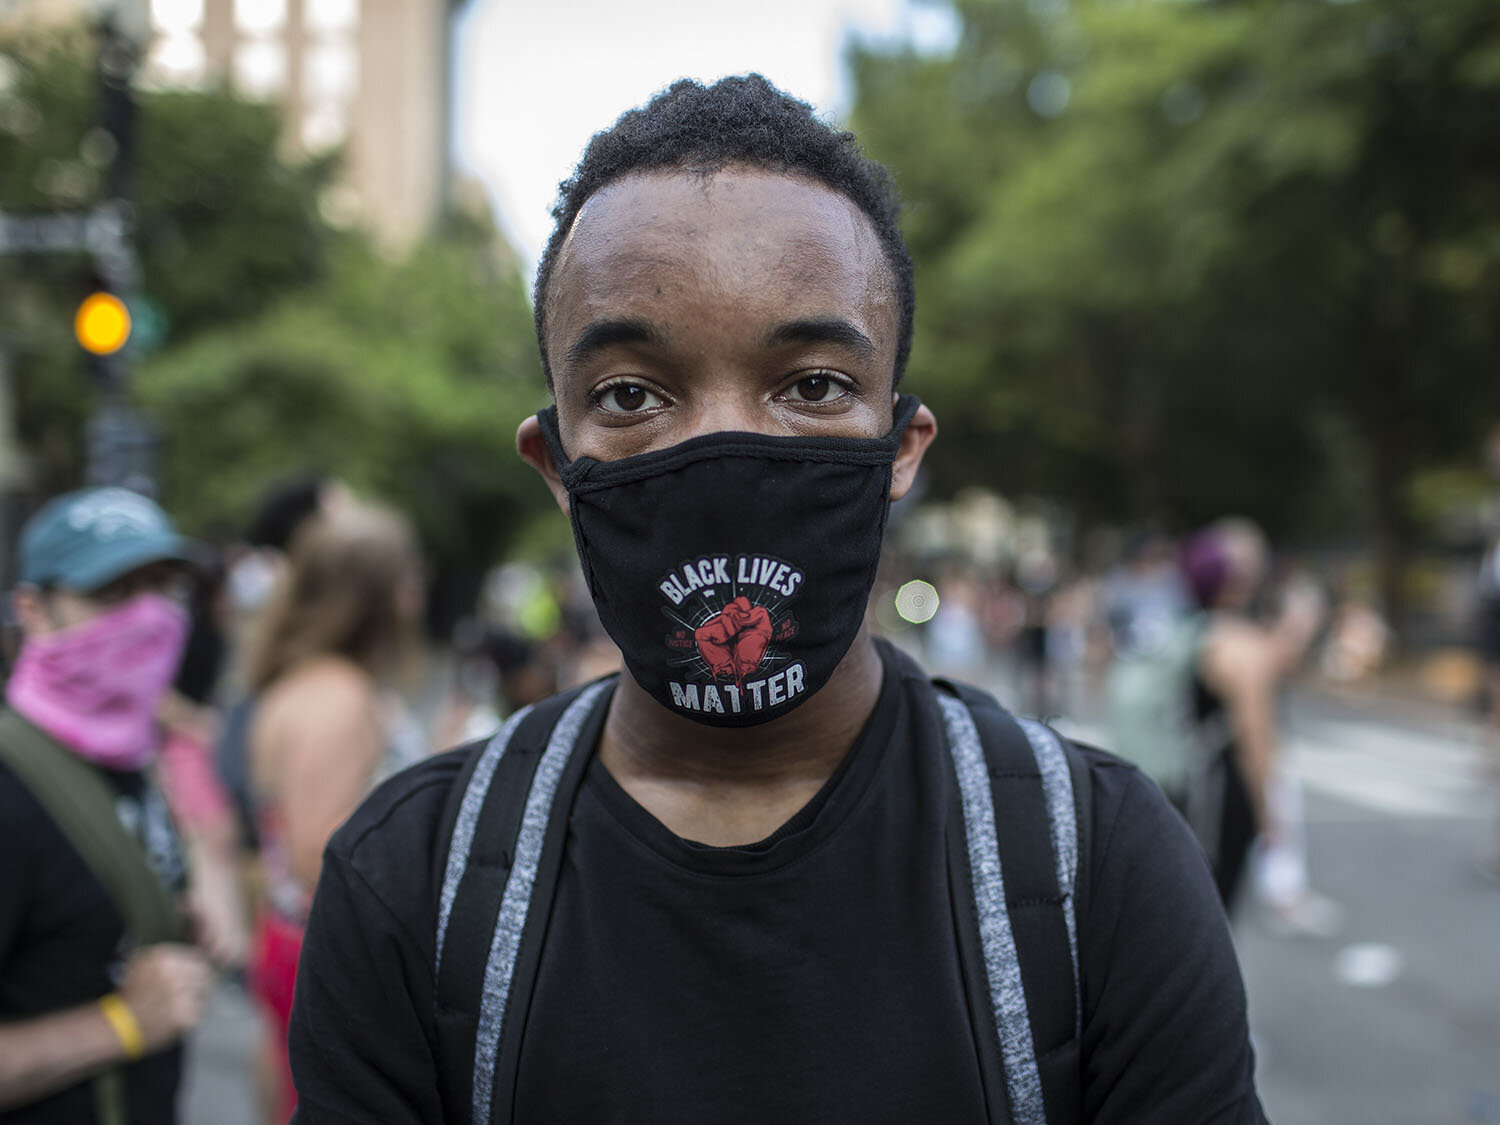  Name:  Vyshan Nisheed   Age: 25  Occupation: I.T. Support  Date and Place the photo was taken: July 04, 2020, Black Lives Matter Plaza, Washington DC, U.S.A.   His Statement:  "I come out to fight for humans. People seem to forget how people how imp